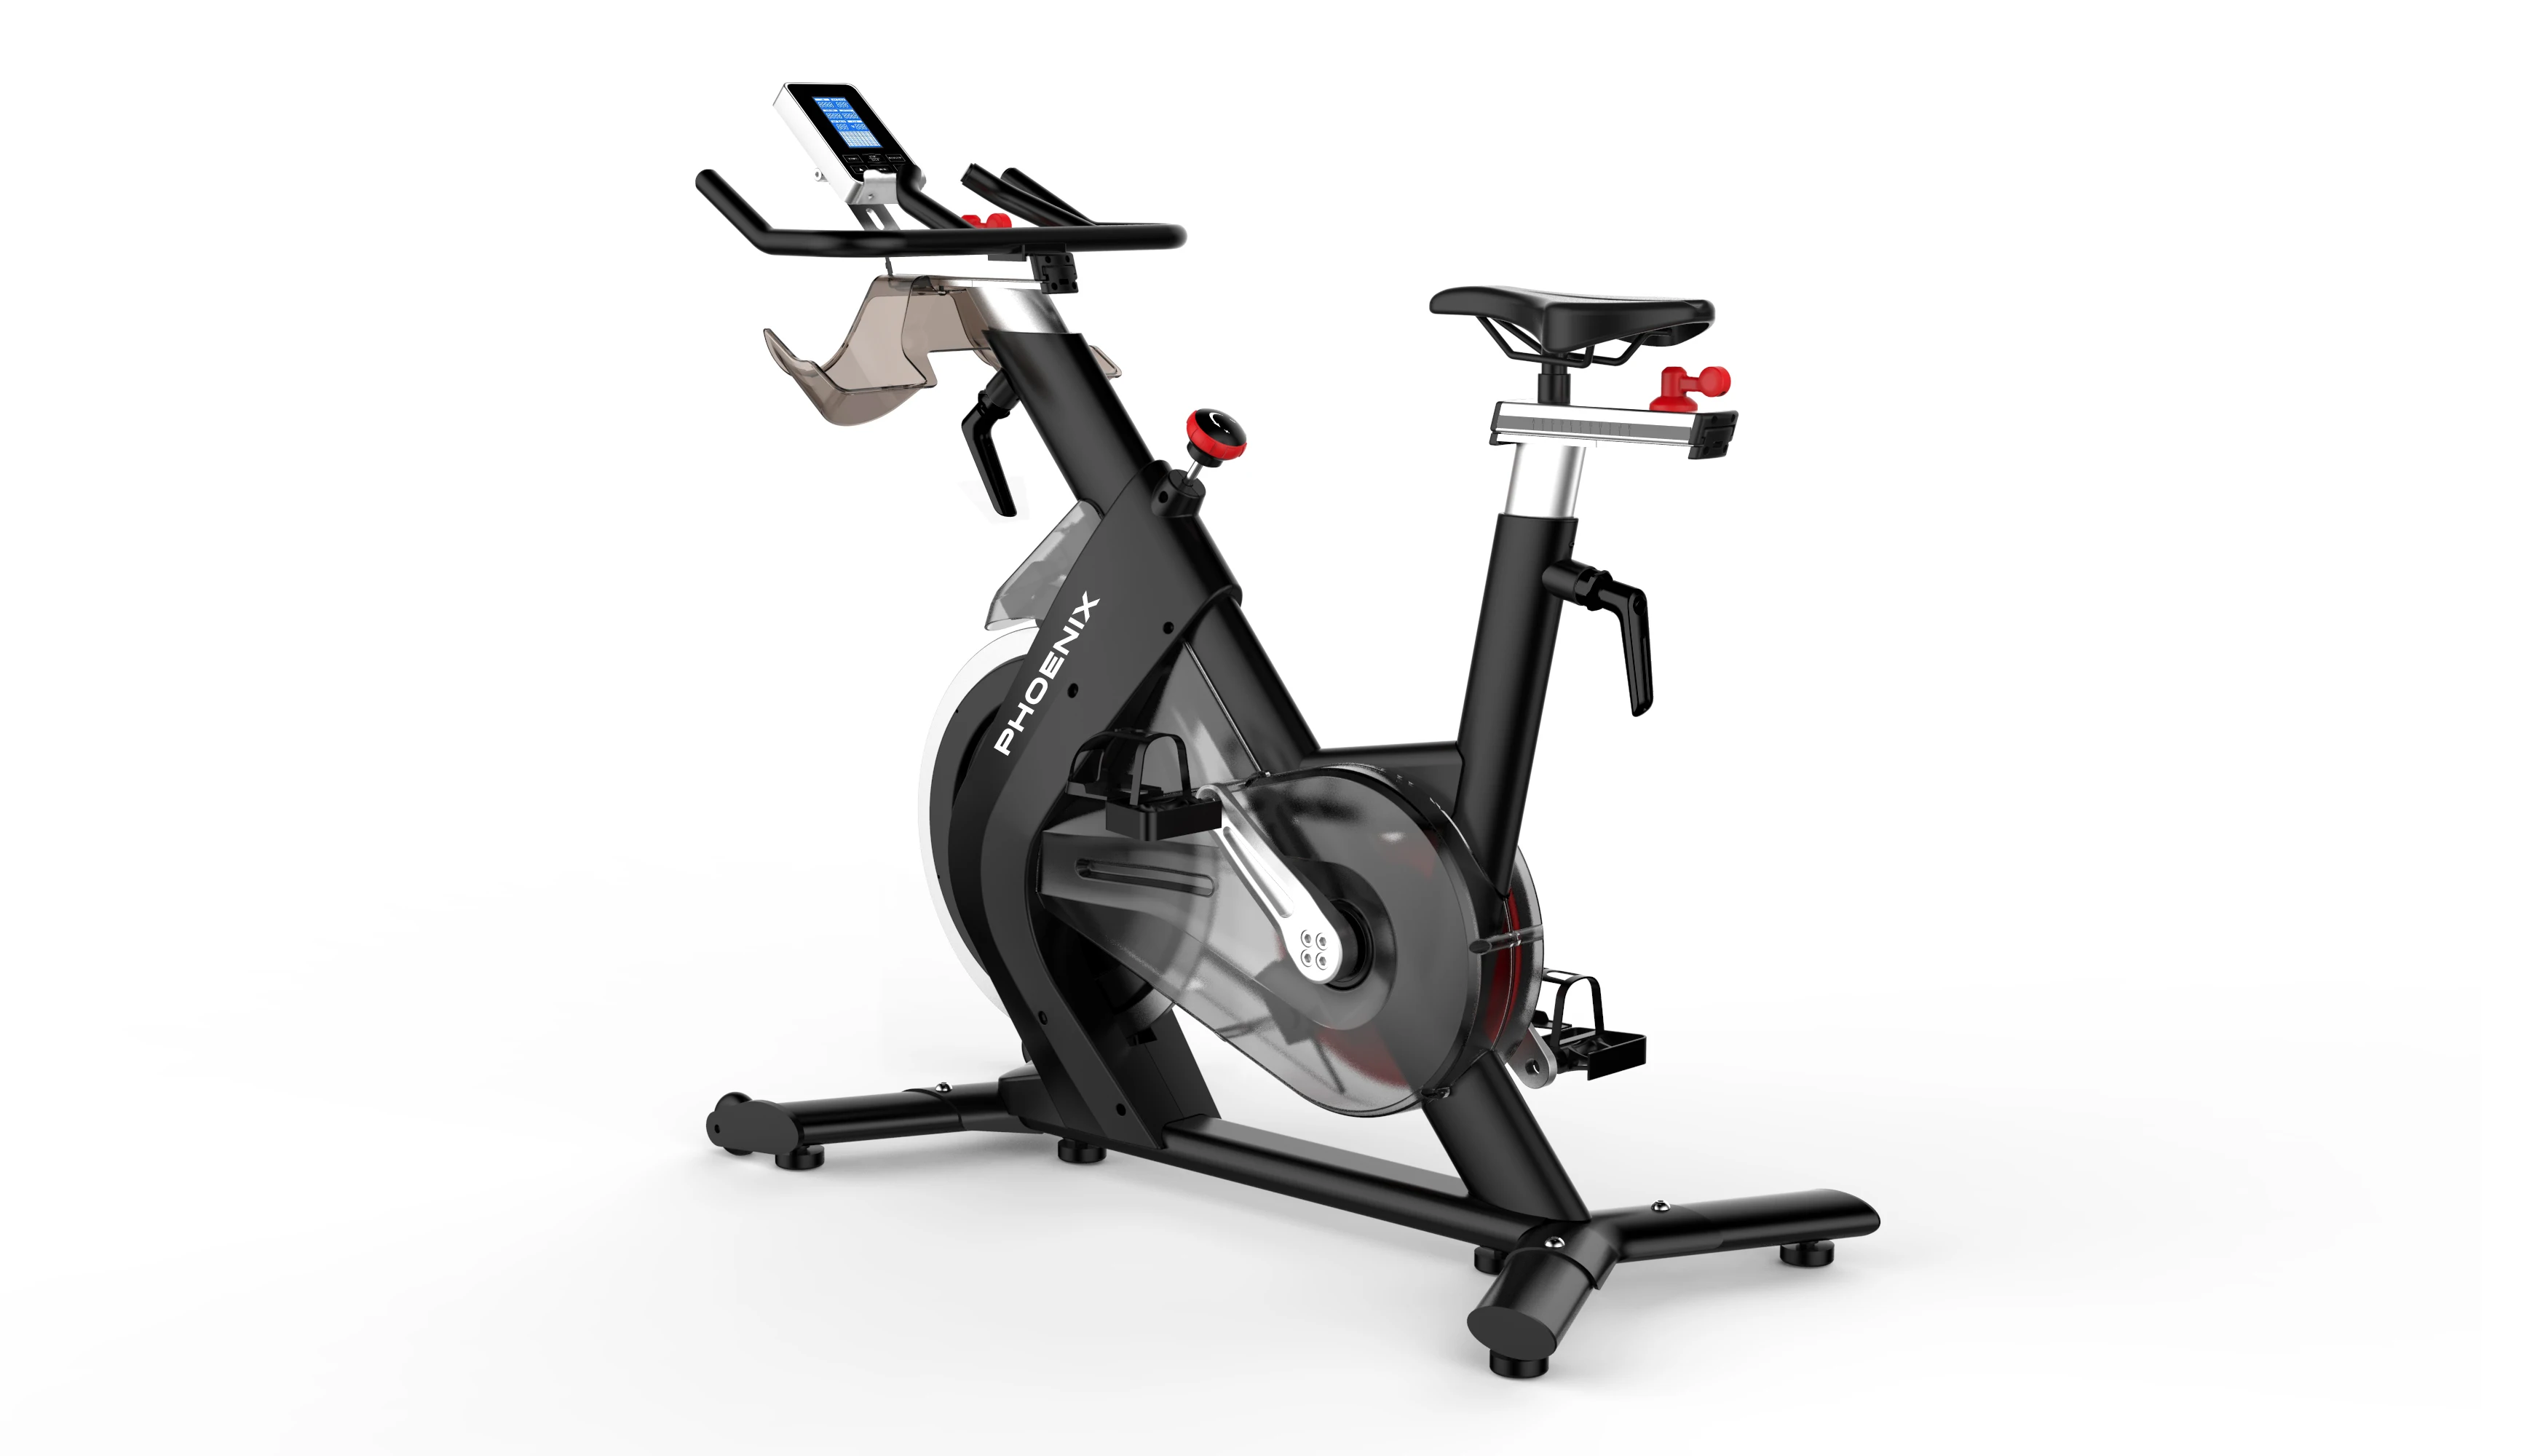 Dhz Residential Product Home Gym Equipment Spin Bike Indoor Cycle S300 ...